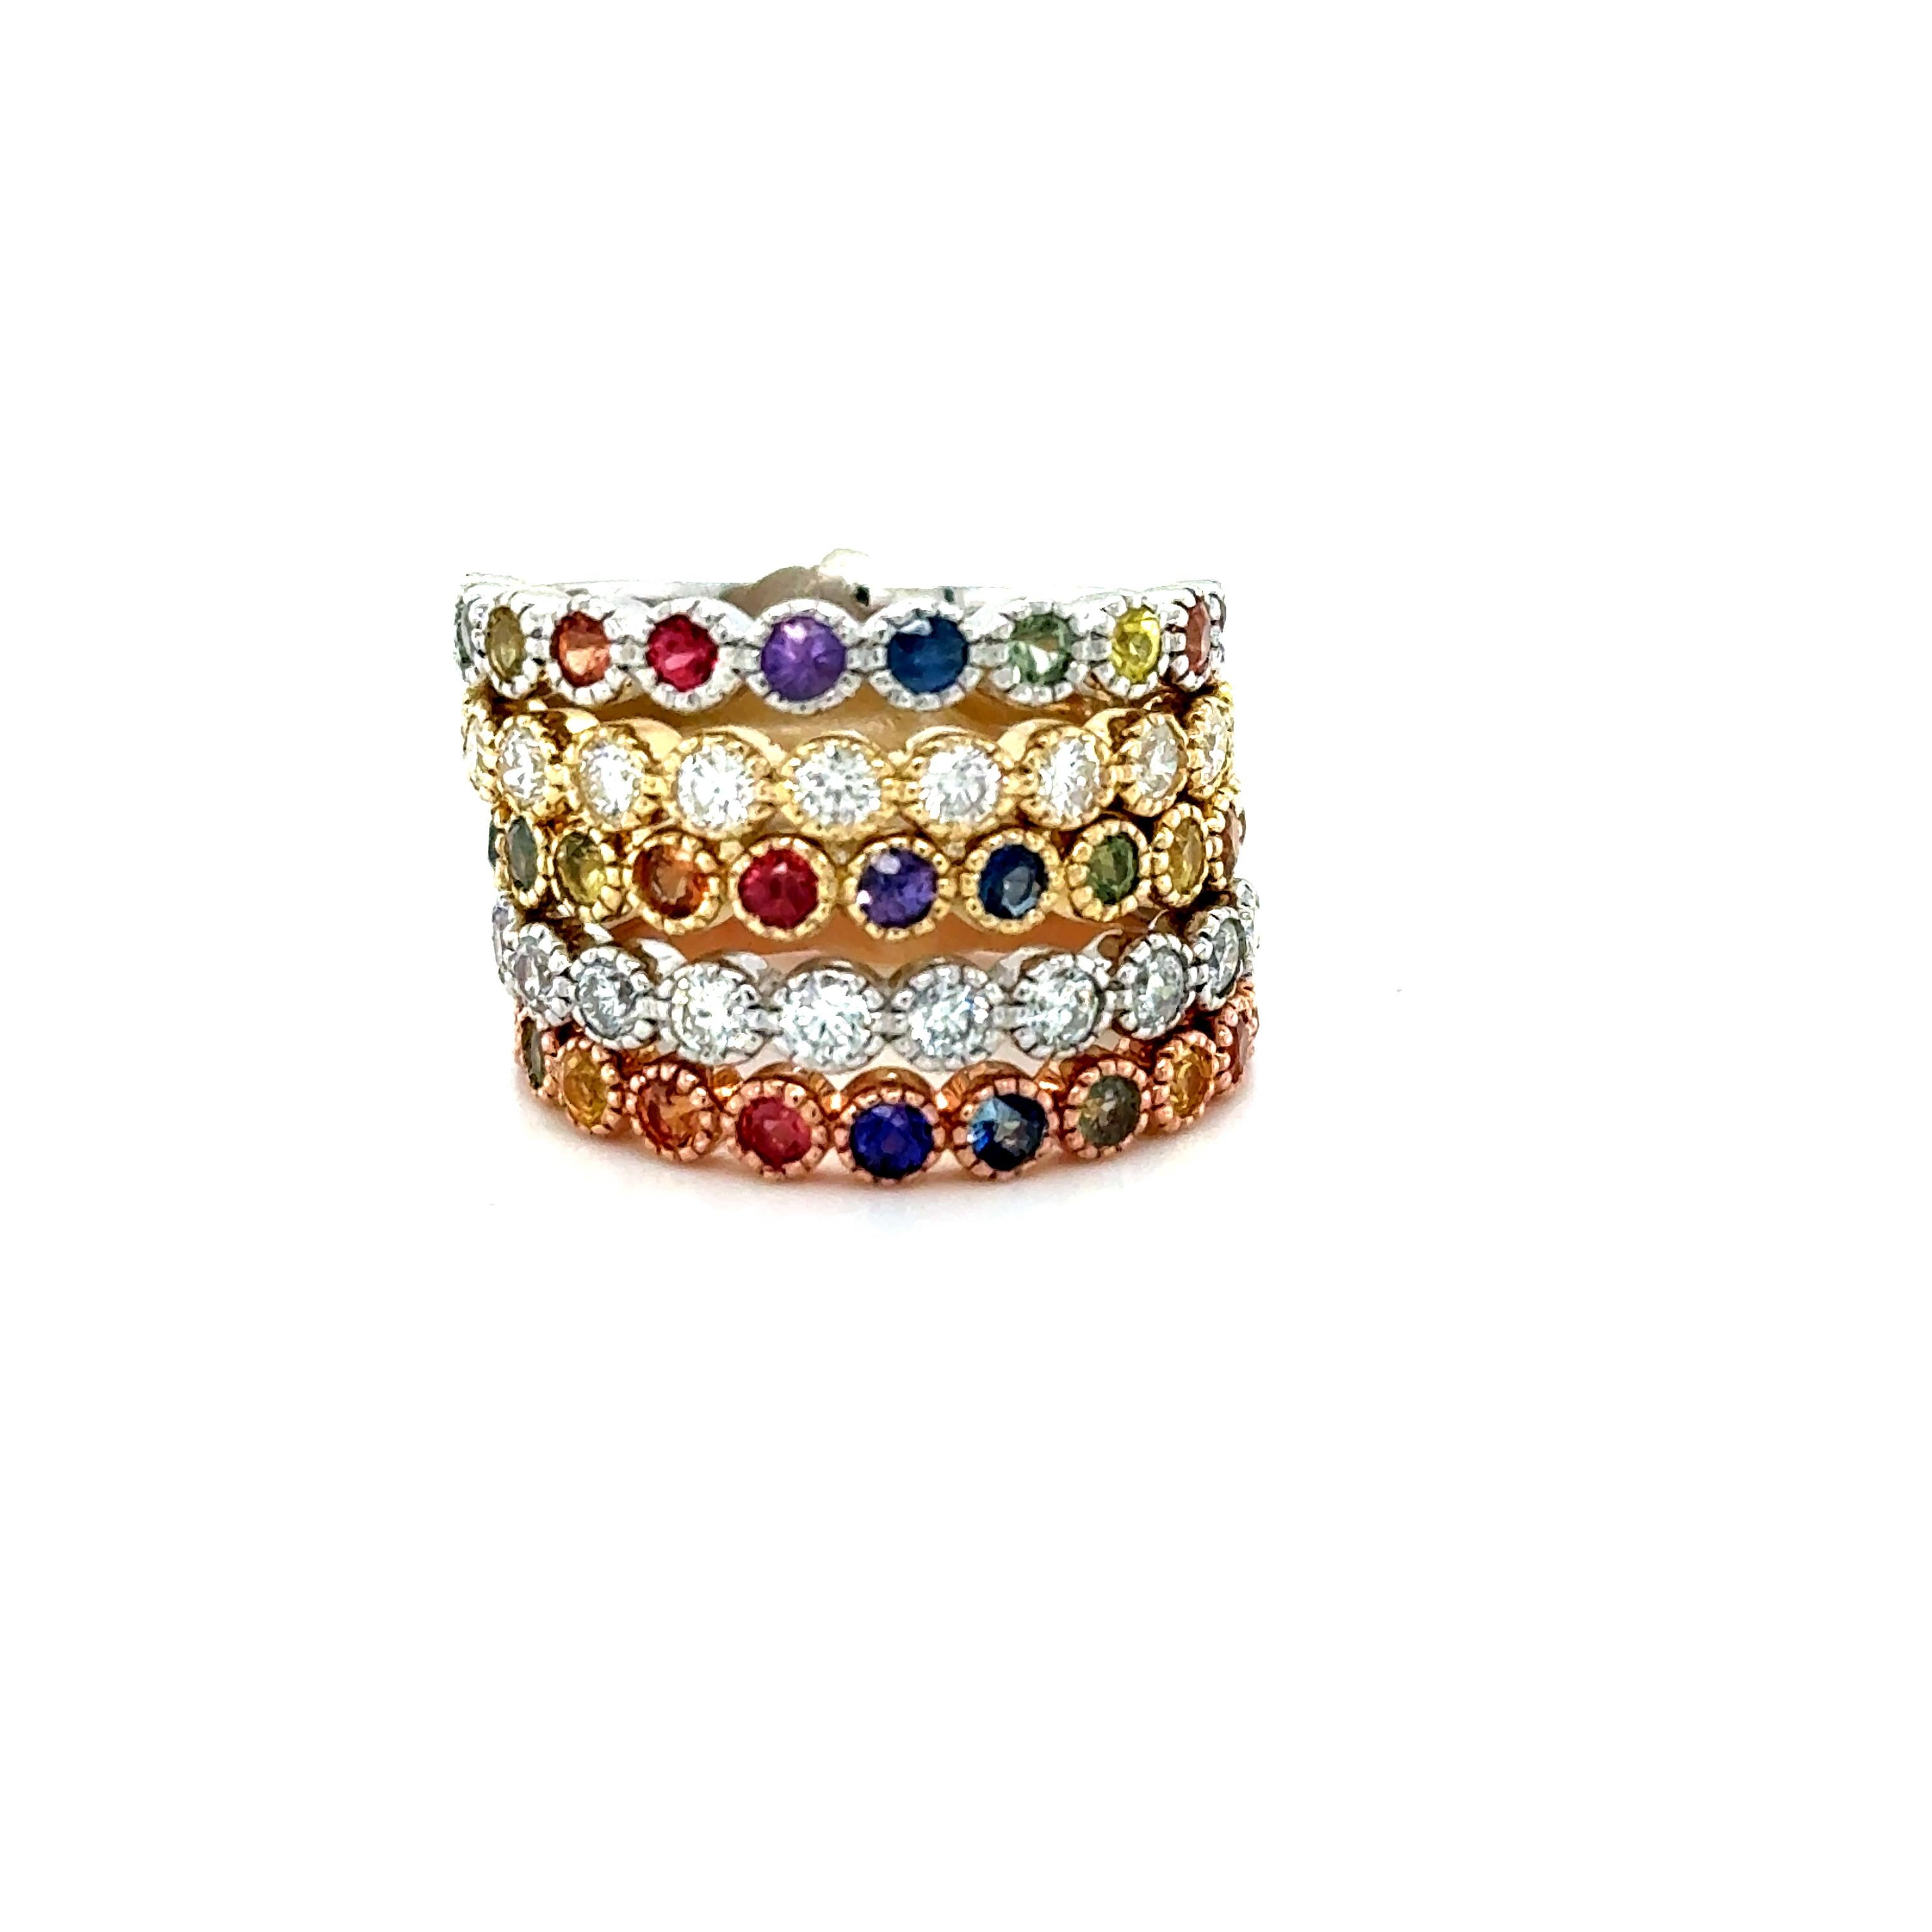 2.84 Carat Diamond and Multi Color Sapphire Stackable Gold Band Set

Set of 5 elegant and classy 2.84 Carat Diamond and Sapphire bands that are sure to be a great addition to your accessory collection! There are 11 Round Cut Sapphires in 3 of the